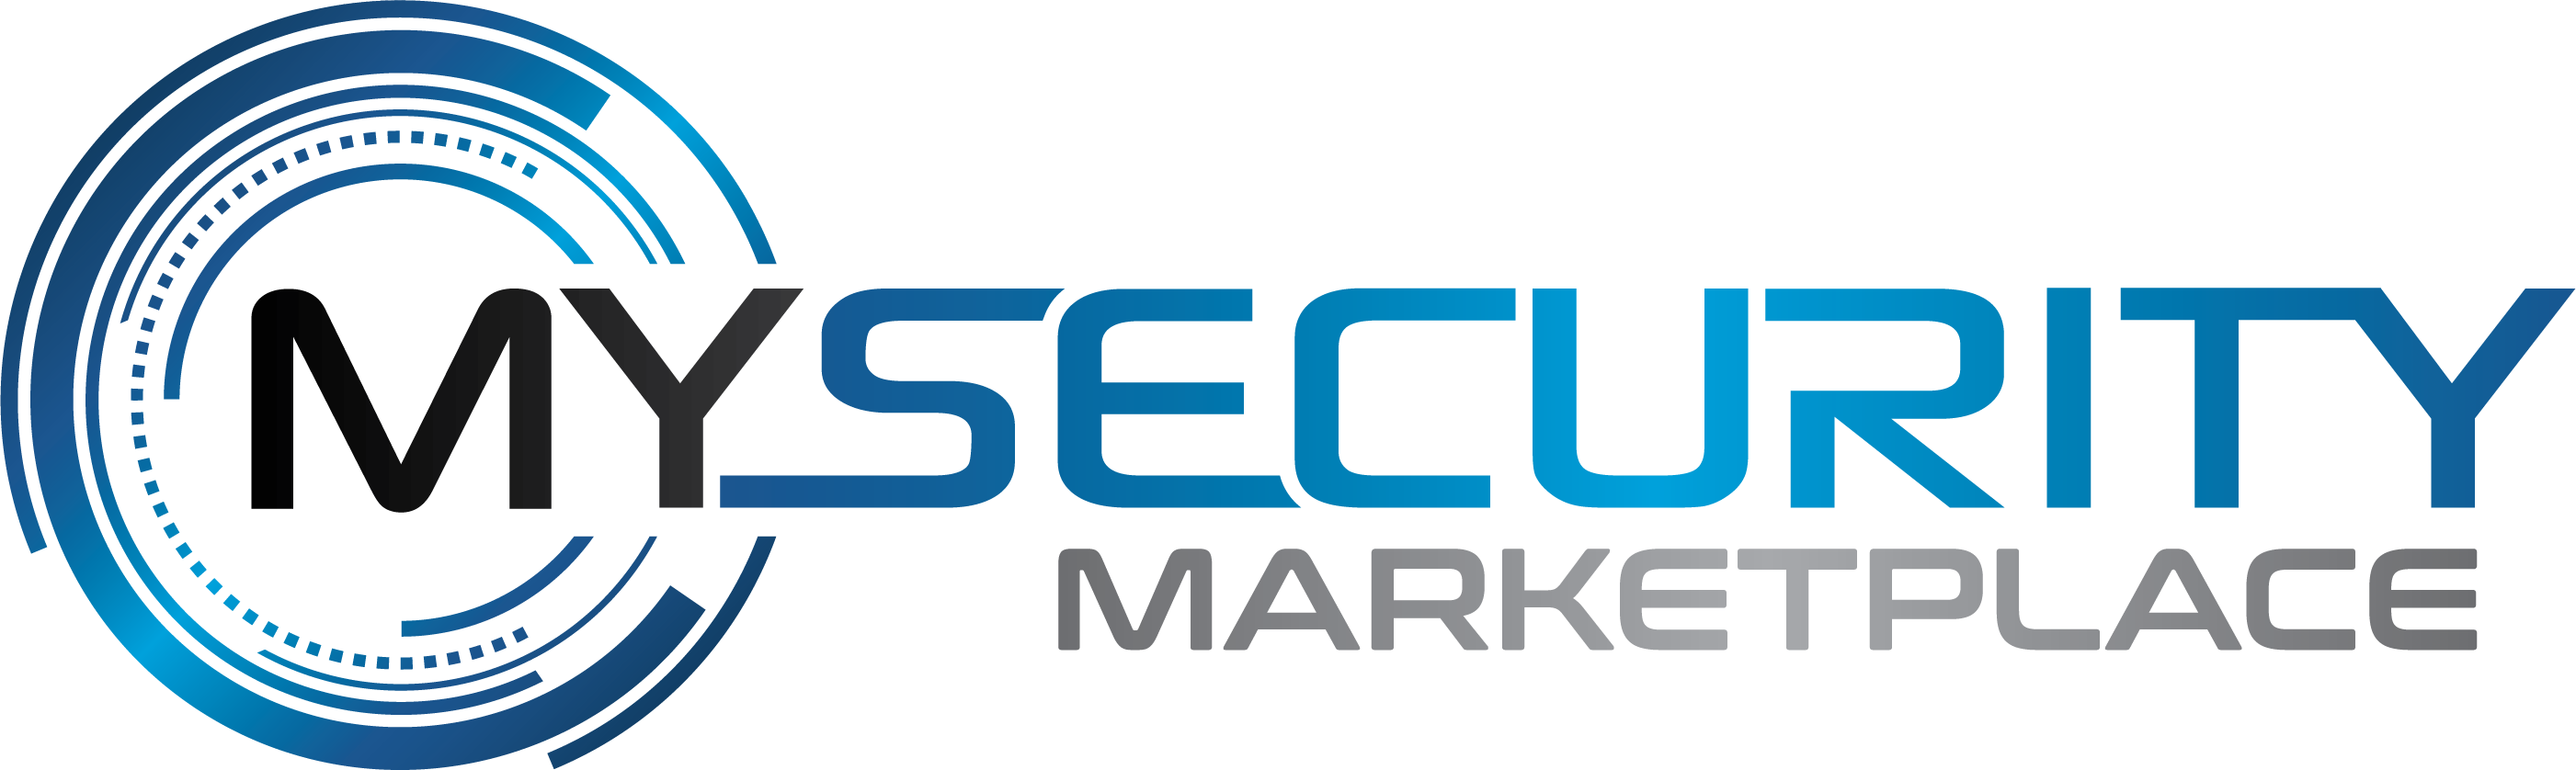 My security Market Place